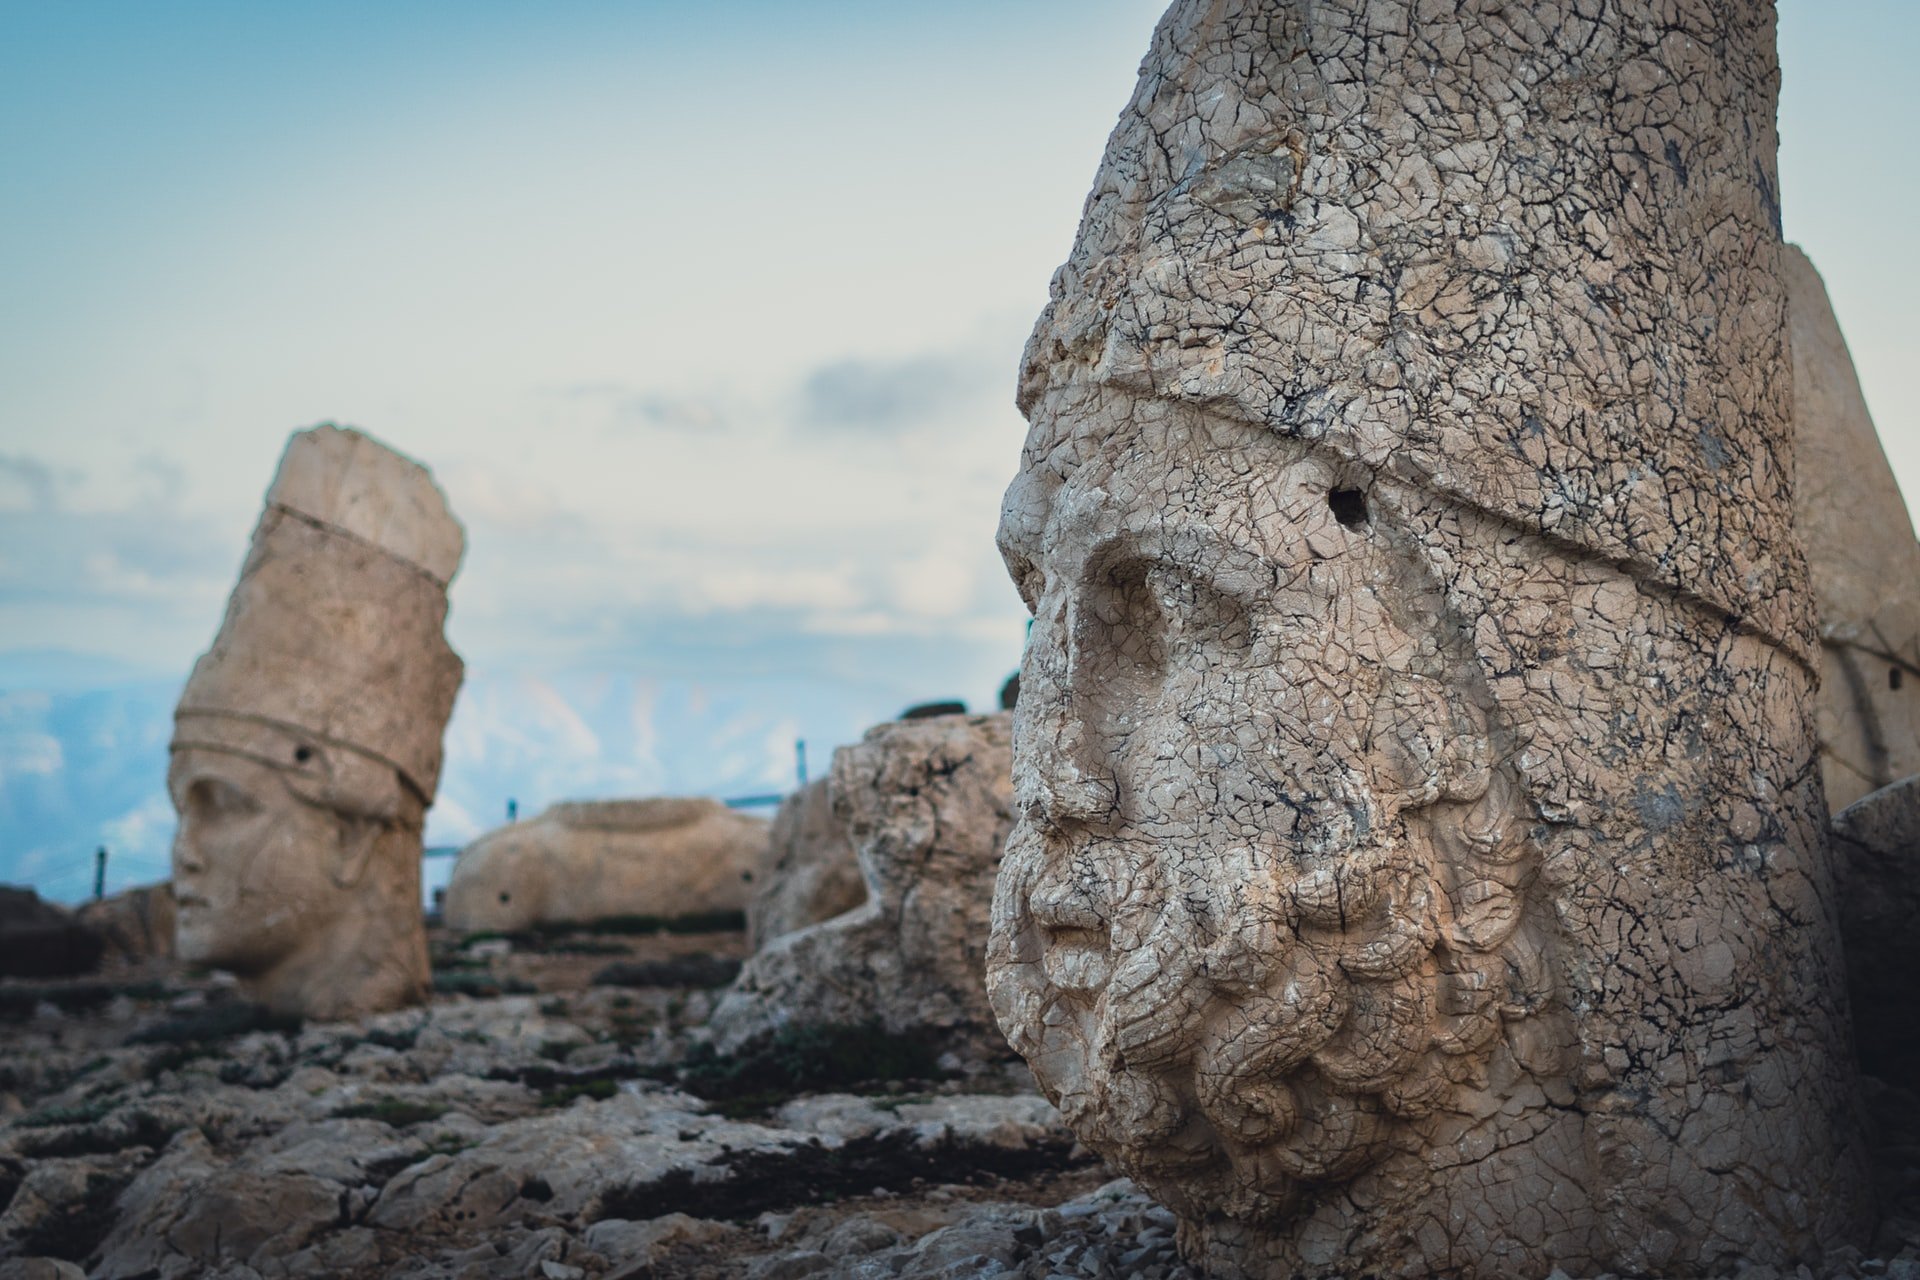 This is a close-up of the statue of a bearded man on Mount Nemrut, one of the lesser-known historic sites in Turkey.